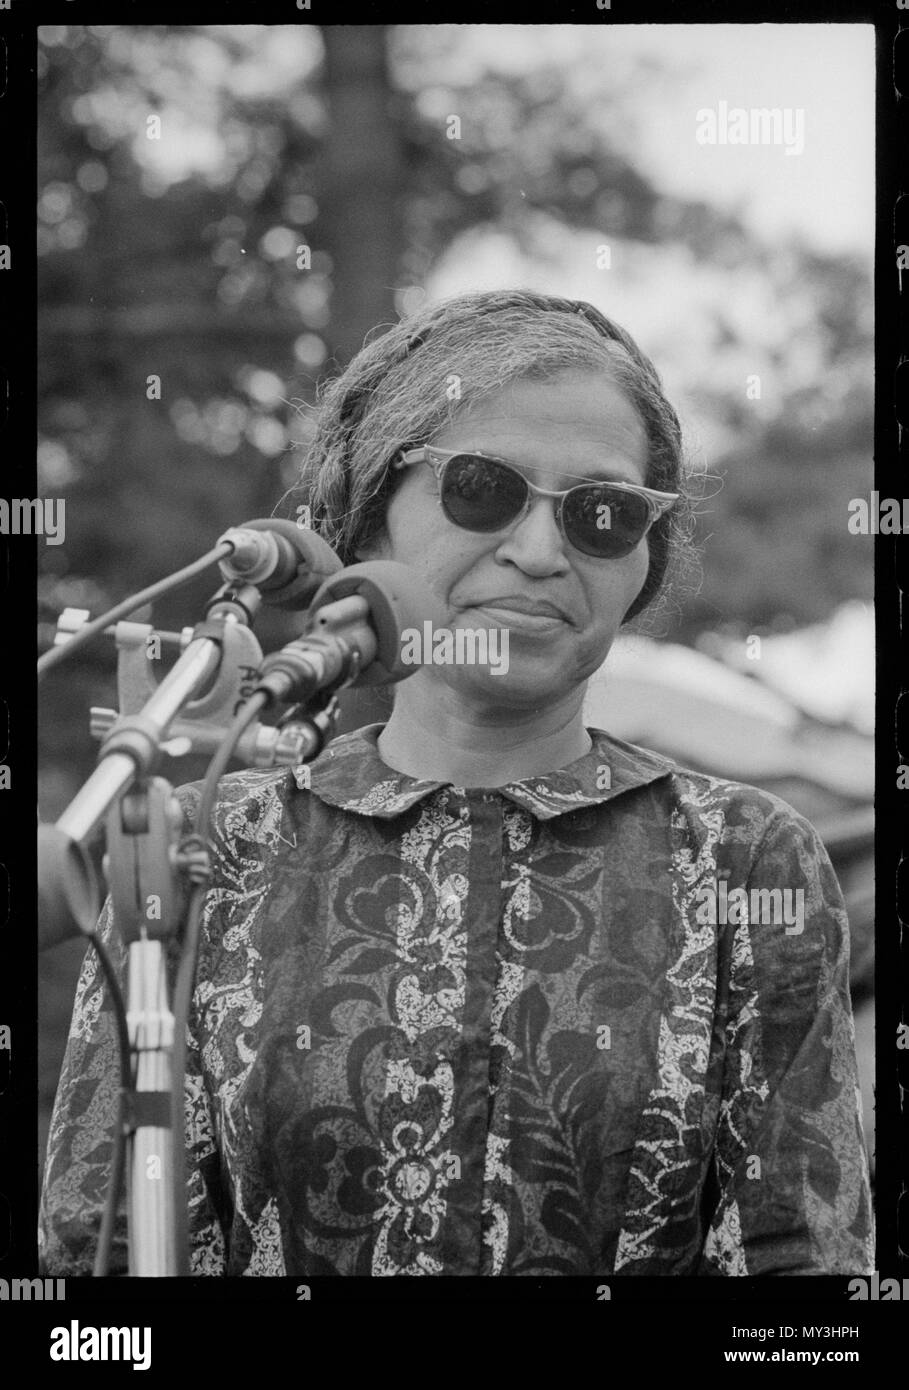 Civil Rights activist Rosa Parks speaks to the crowd at the Poor People's March on Washington, the campaign organized by Martin Luther King, Jr and the Southern Christian Leadership Conference to gain economic justice for poor people, Washington, DC, 6/20/1968. Photo by Warren K. Leffler. Stock Photo